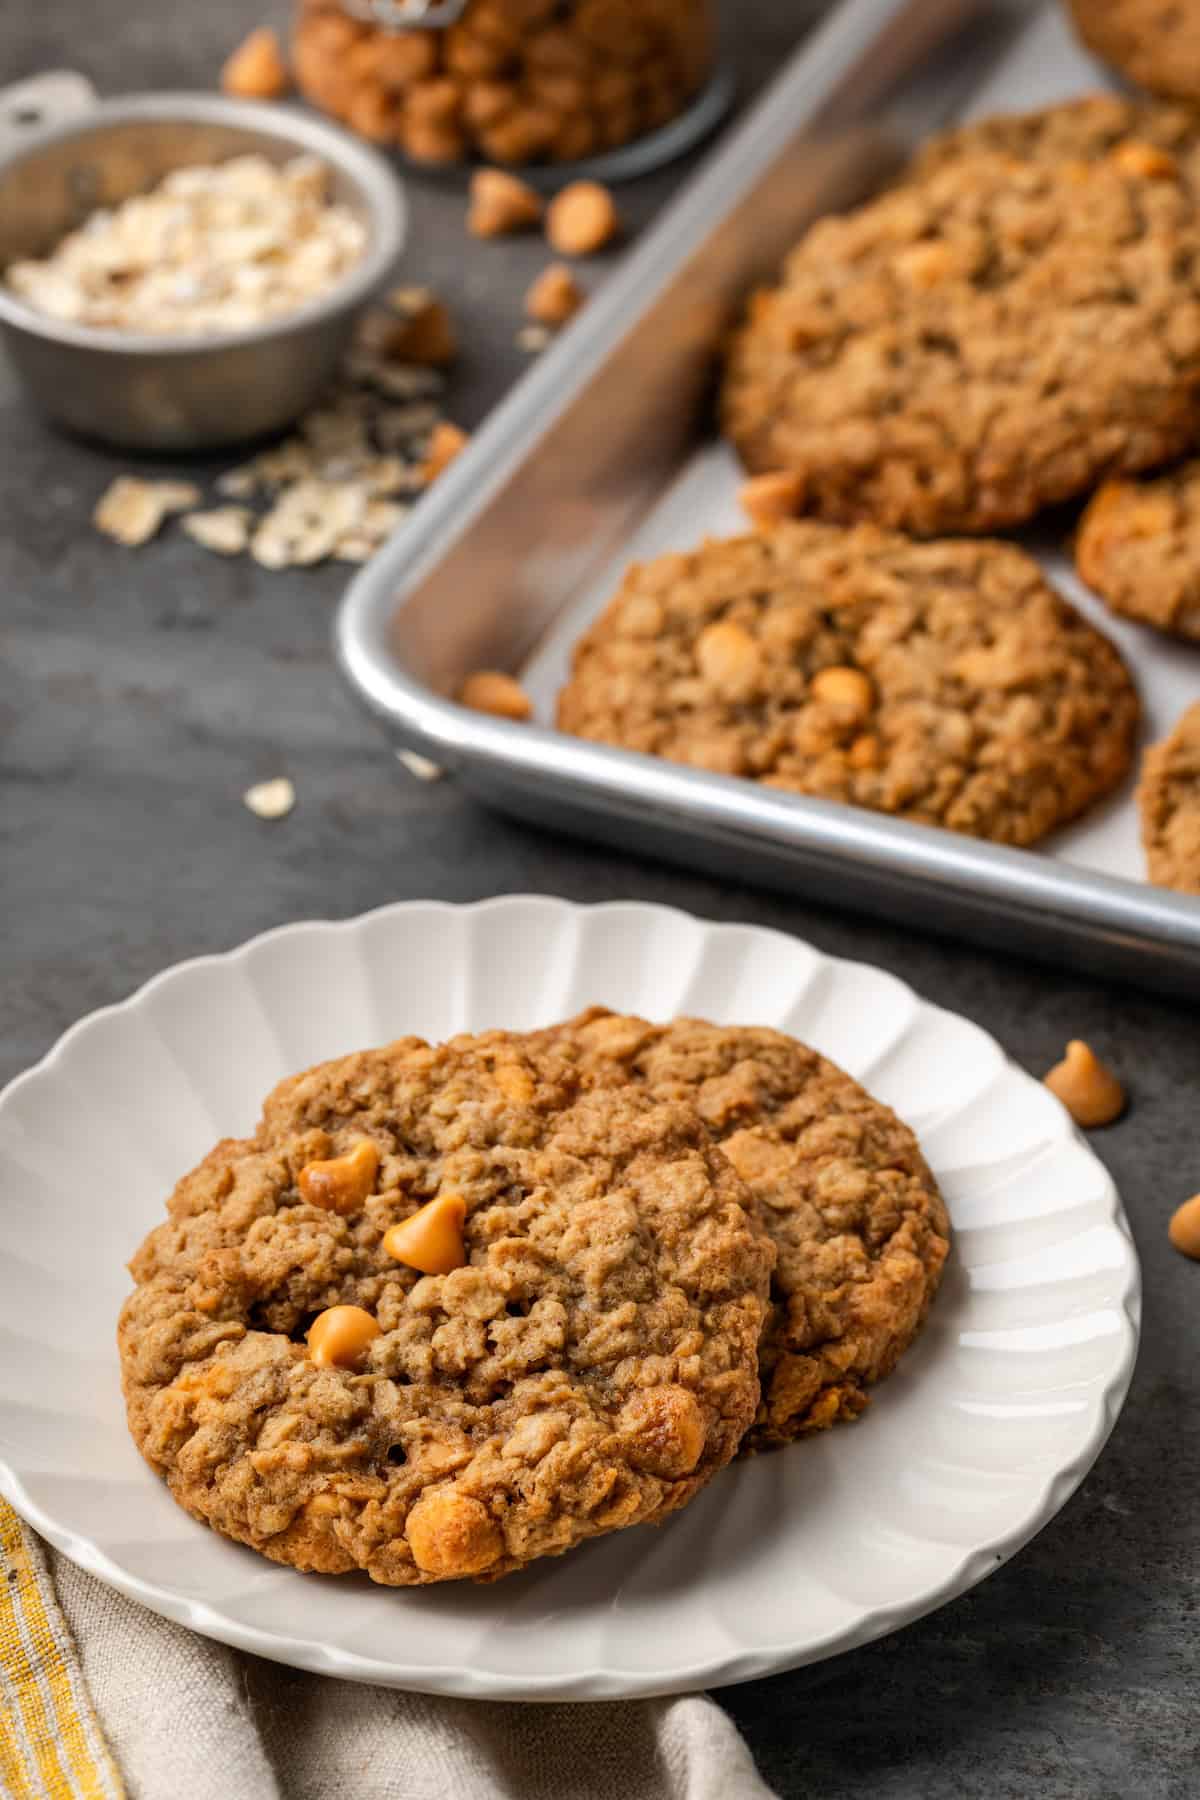 Two oatmeal butterscotch cookies on a white plate, with more cookies on a baking sheet in the background.